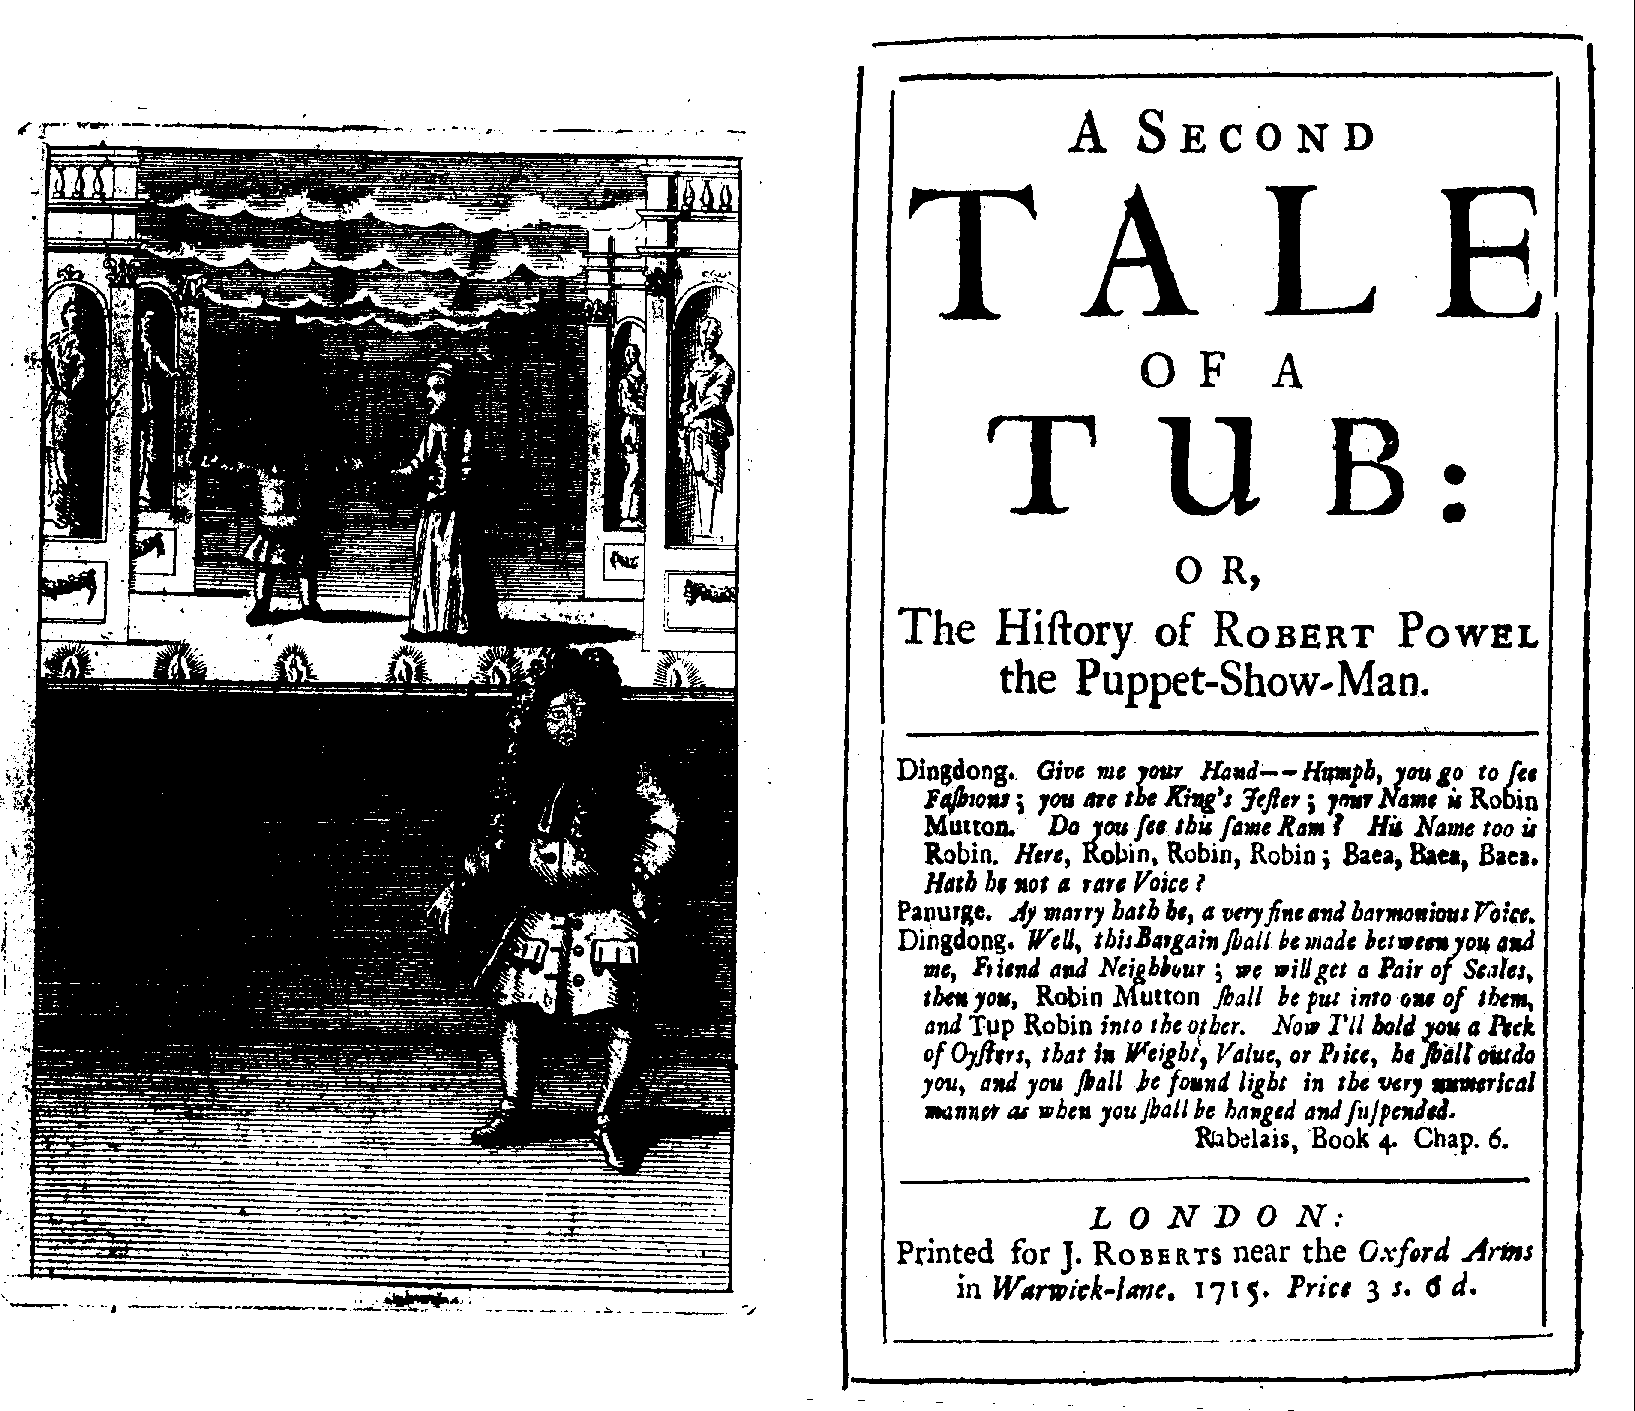 [George Duckett?] A Second Tale of a Tub: or, The History of Robert Powel the Puppet-Show-Man (London: J. Roberts, 1715).